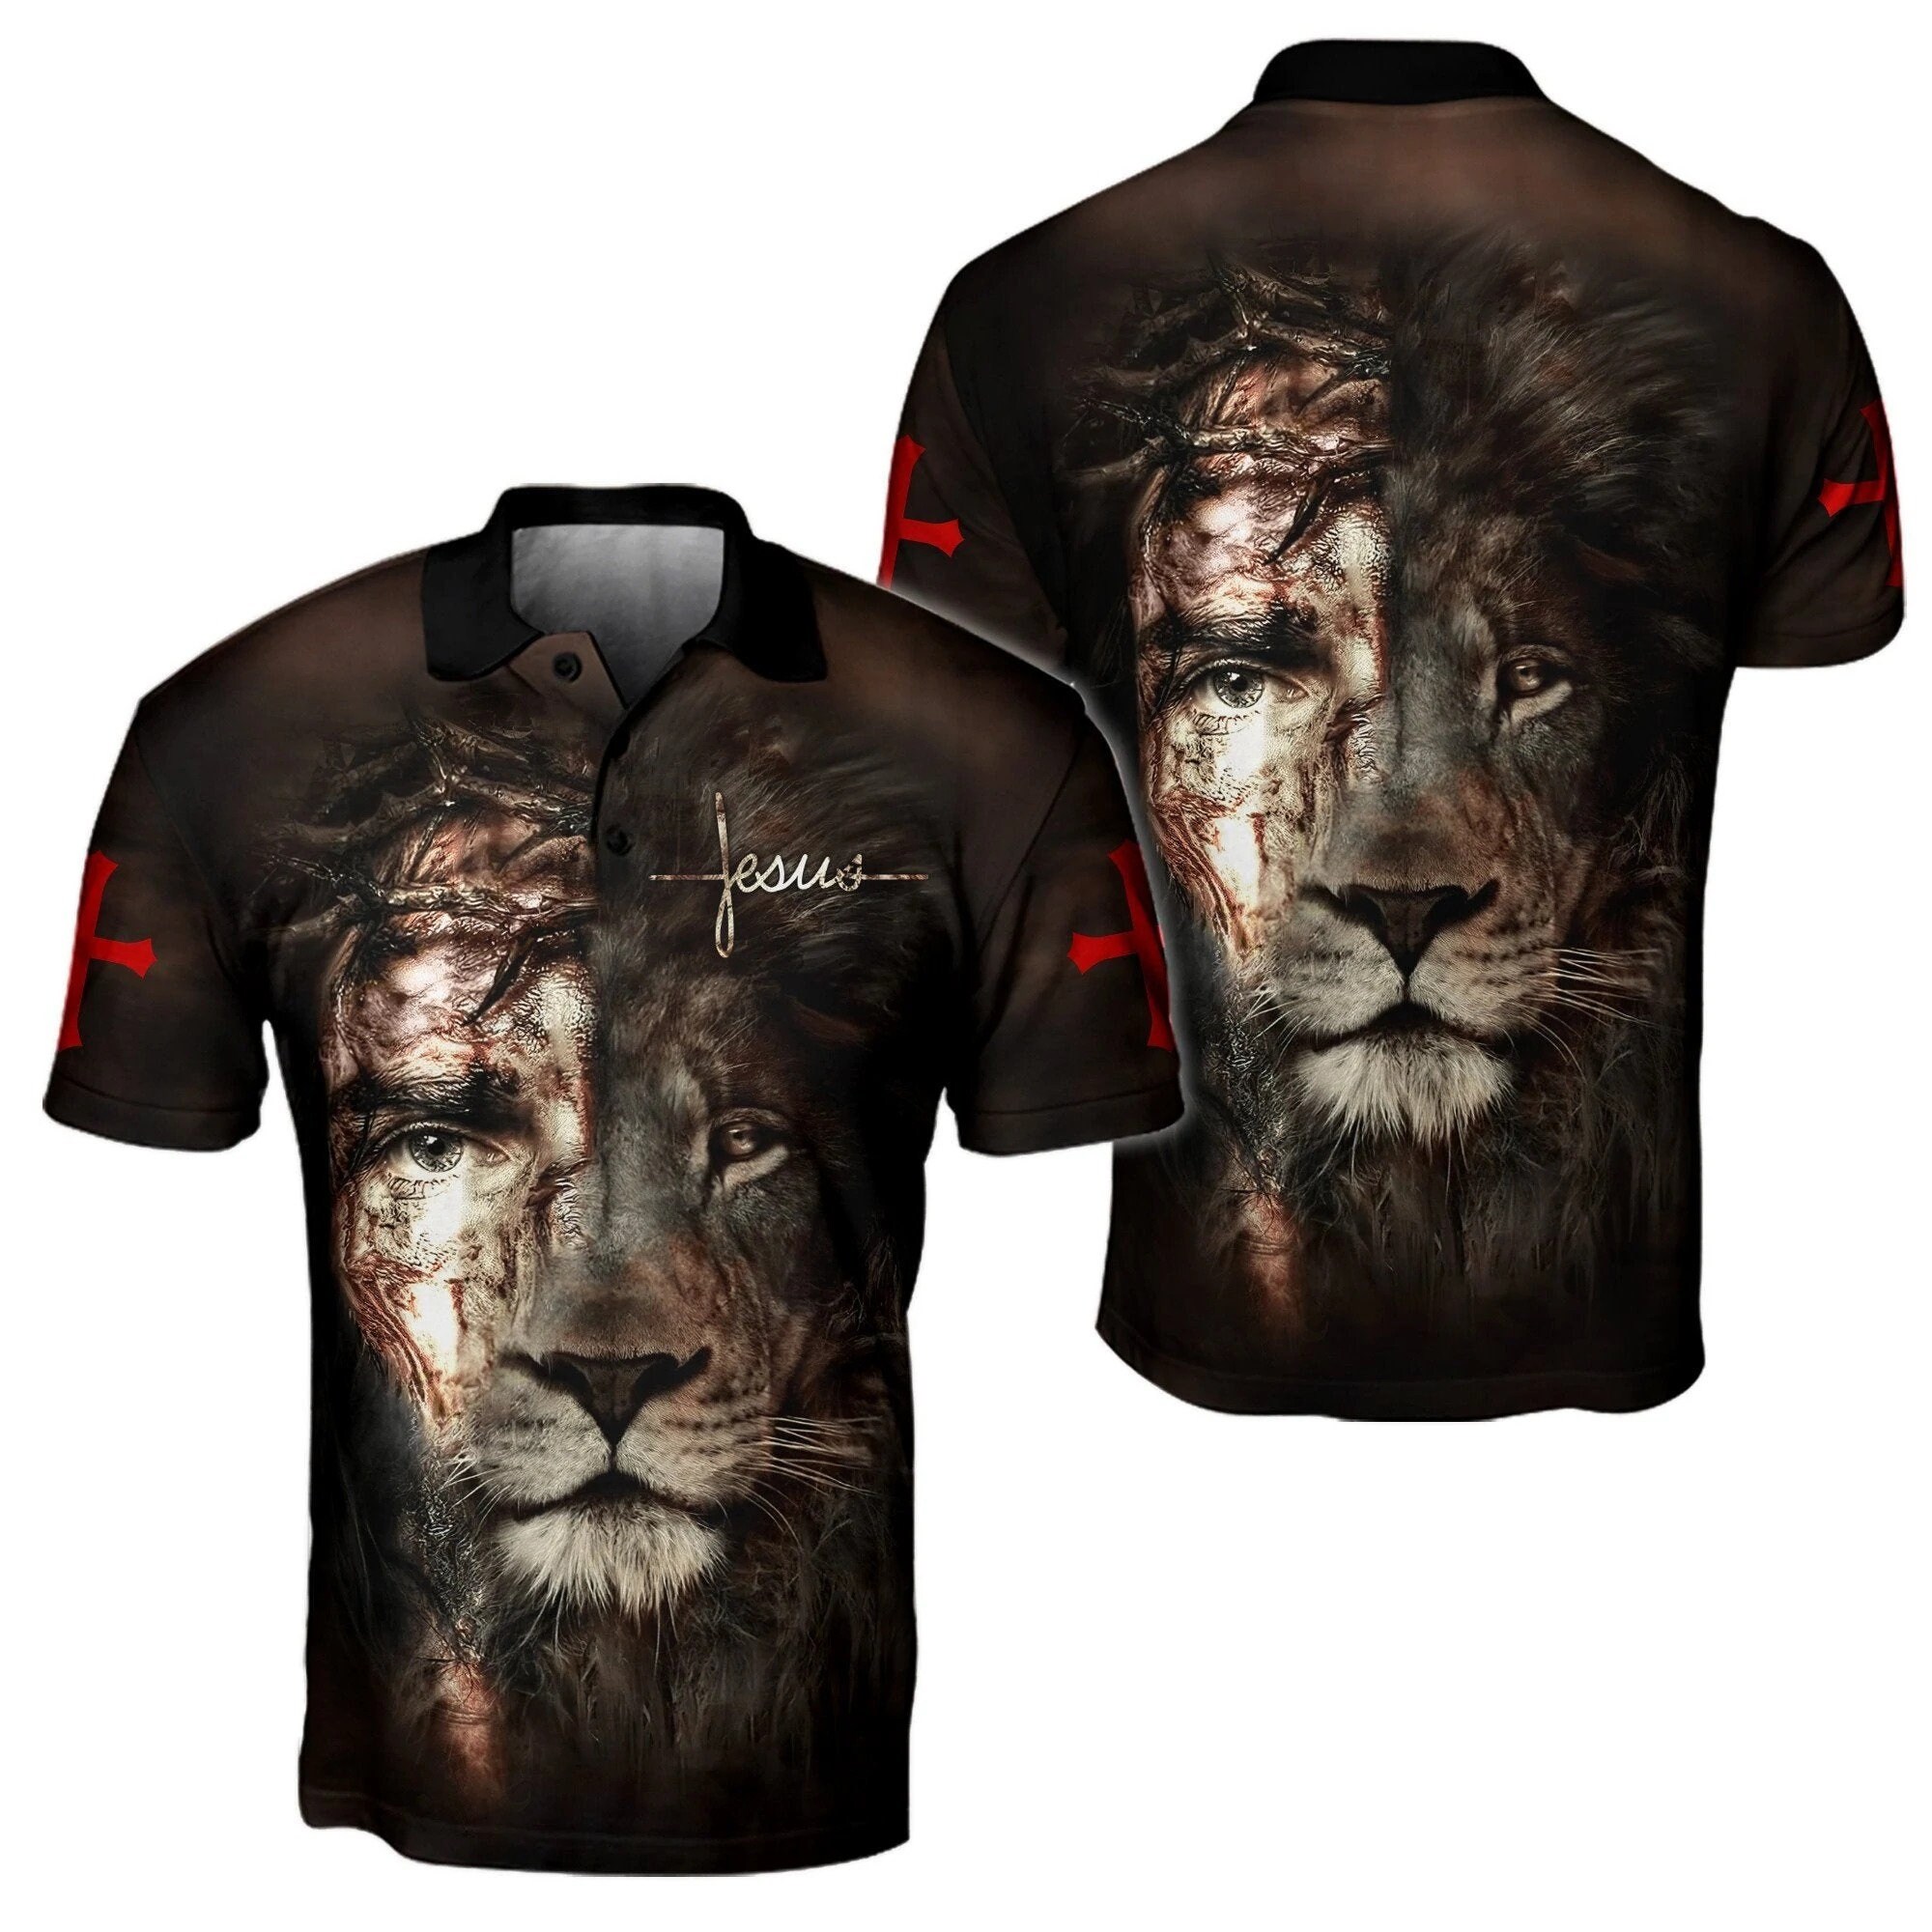 Discover Jesus and Lion 3D All Over Printed Unisex Polo Shirt- Jesus Christ Polo Short Sleeve, Long Sleeve Polo Shirt